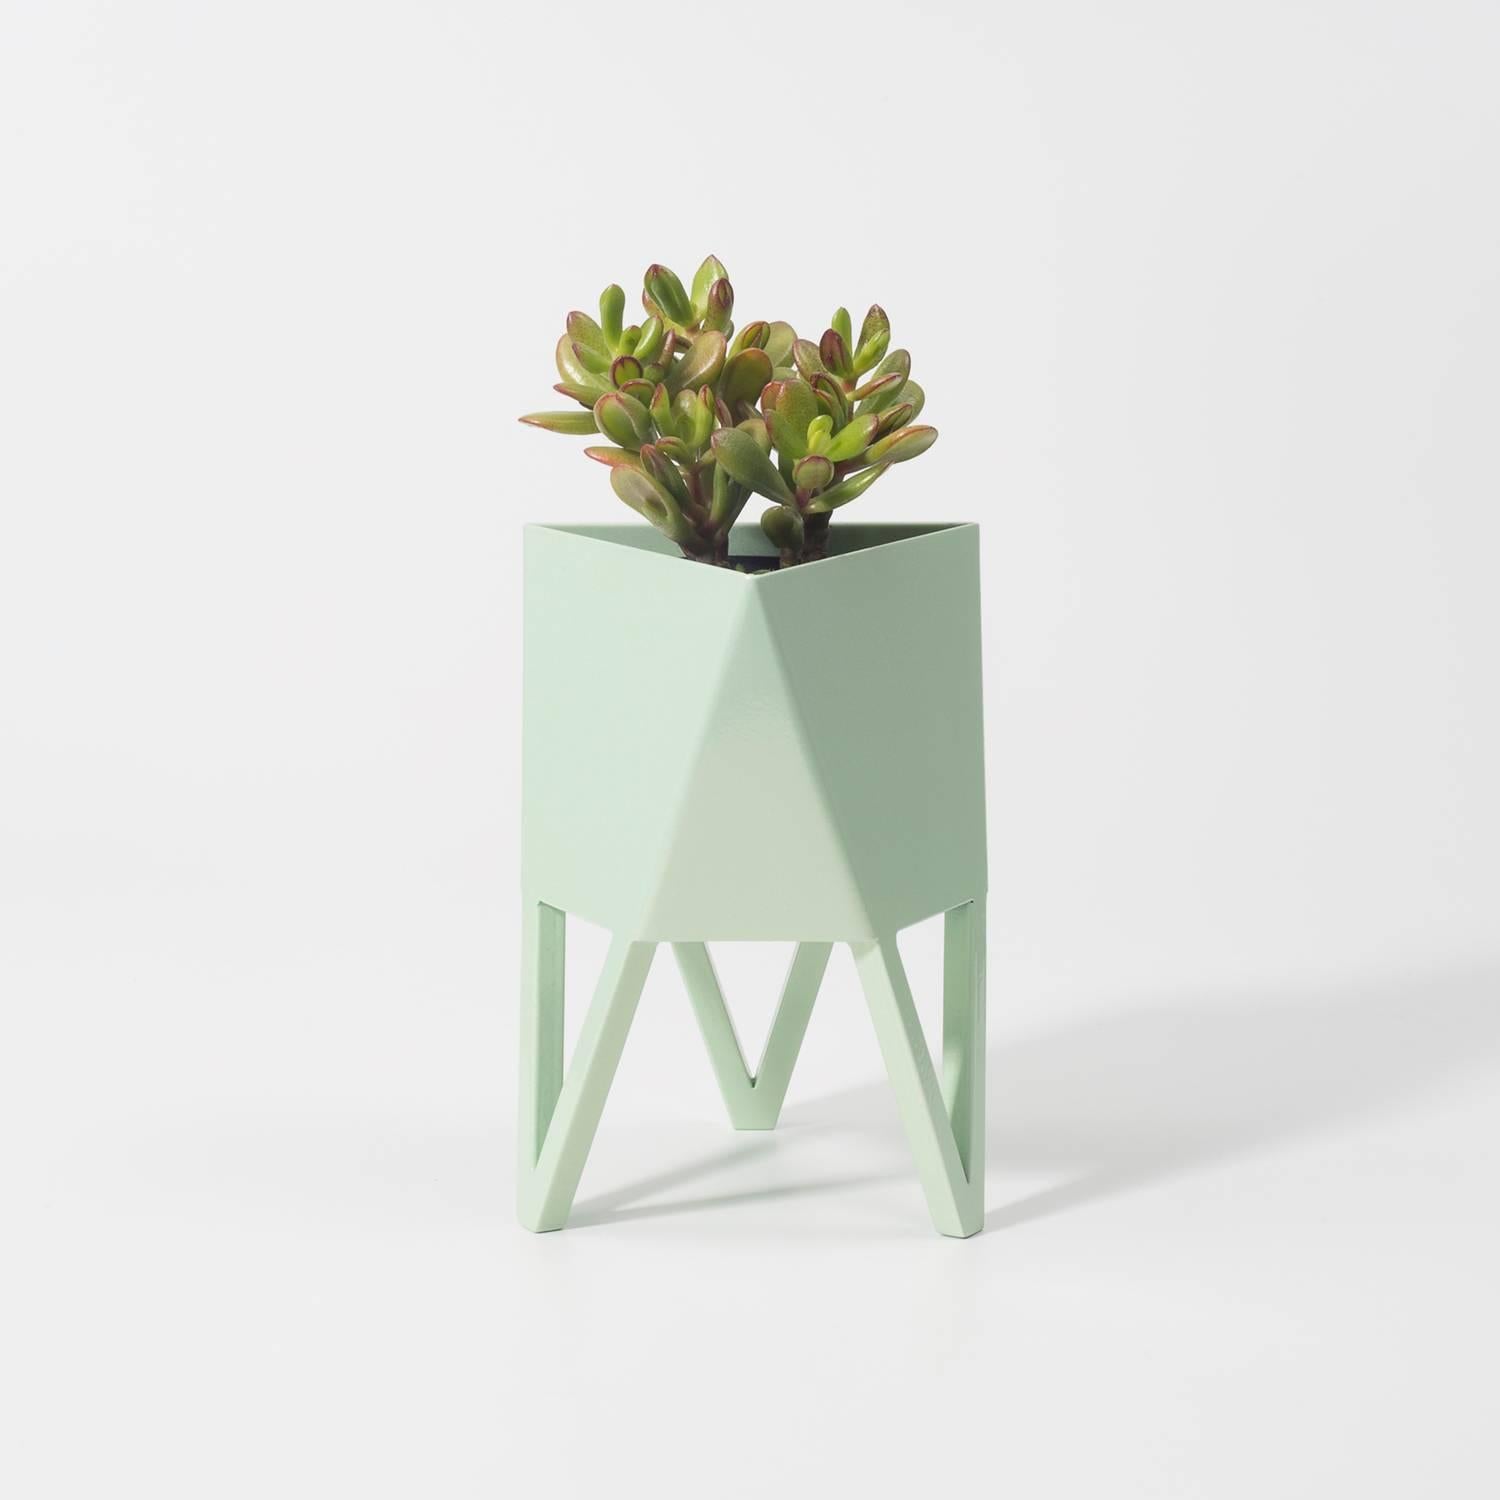 Deca Planter in Living Coral Steel, Medium, by Force/Collide 6